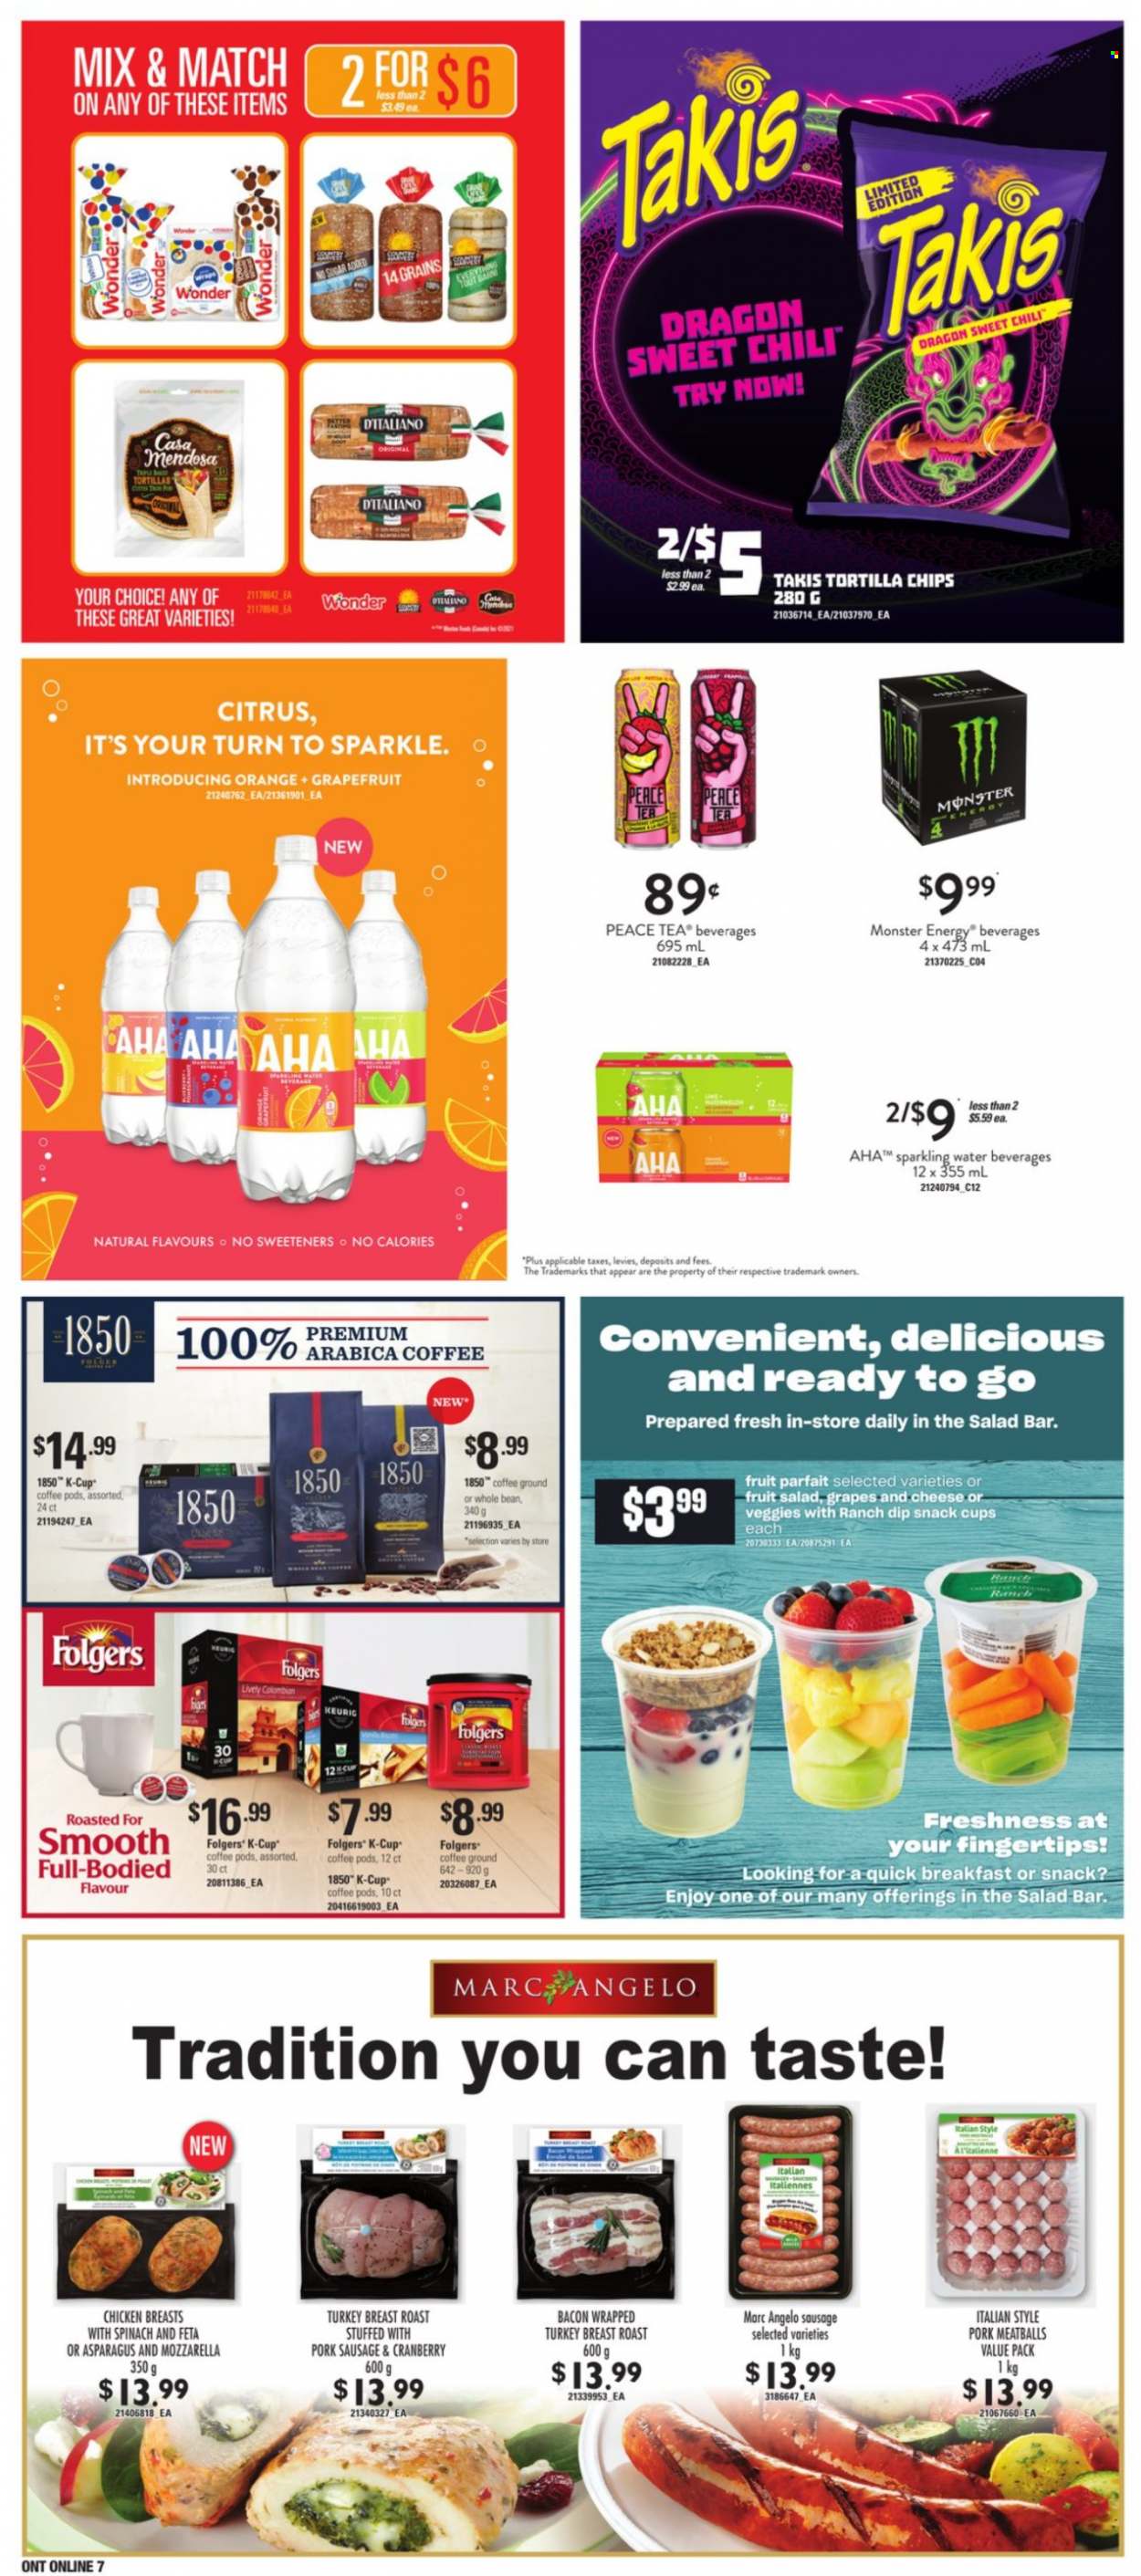 thumbnail - Loblaws Flyer - September 23, 2021 - September 29, 2021 - Sales products - asparagus, grapefruits, grapes, meatballs, bacon, sausage, pork sausage, feta, dip, tortilla chips, fruit salad, Monster, Monster Energy, sparkling water, tea, coffee pods, Folgers, coffee capsules, K-Cups, turkey breast, chicken breasts, turkey, chips, oranges. Page 11.